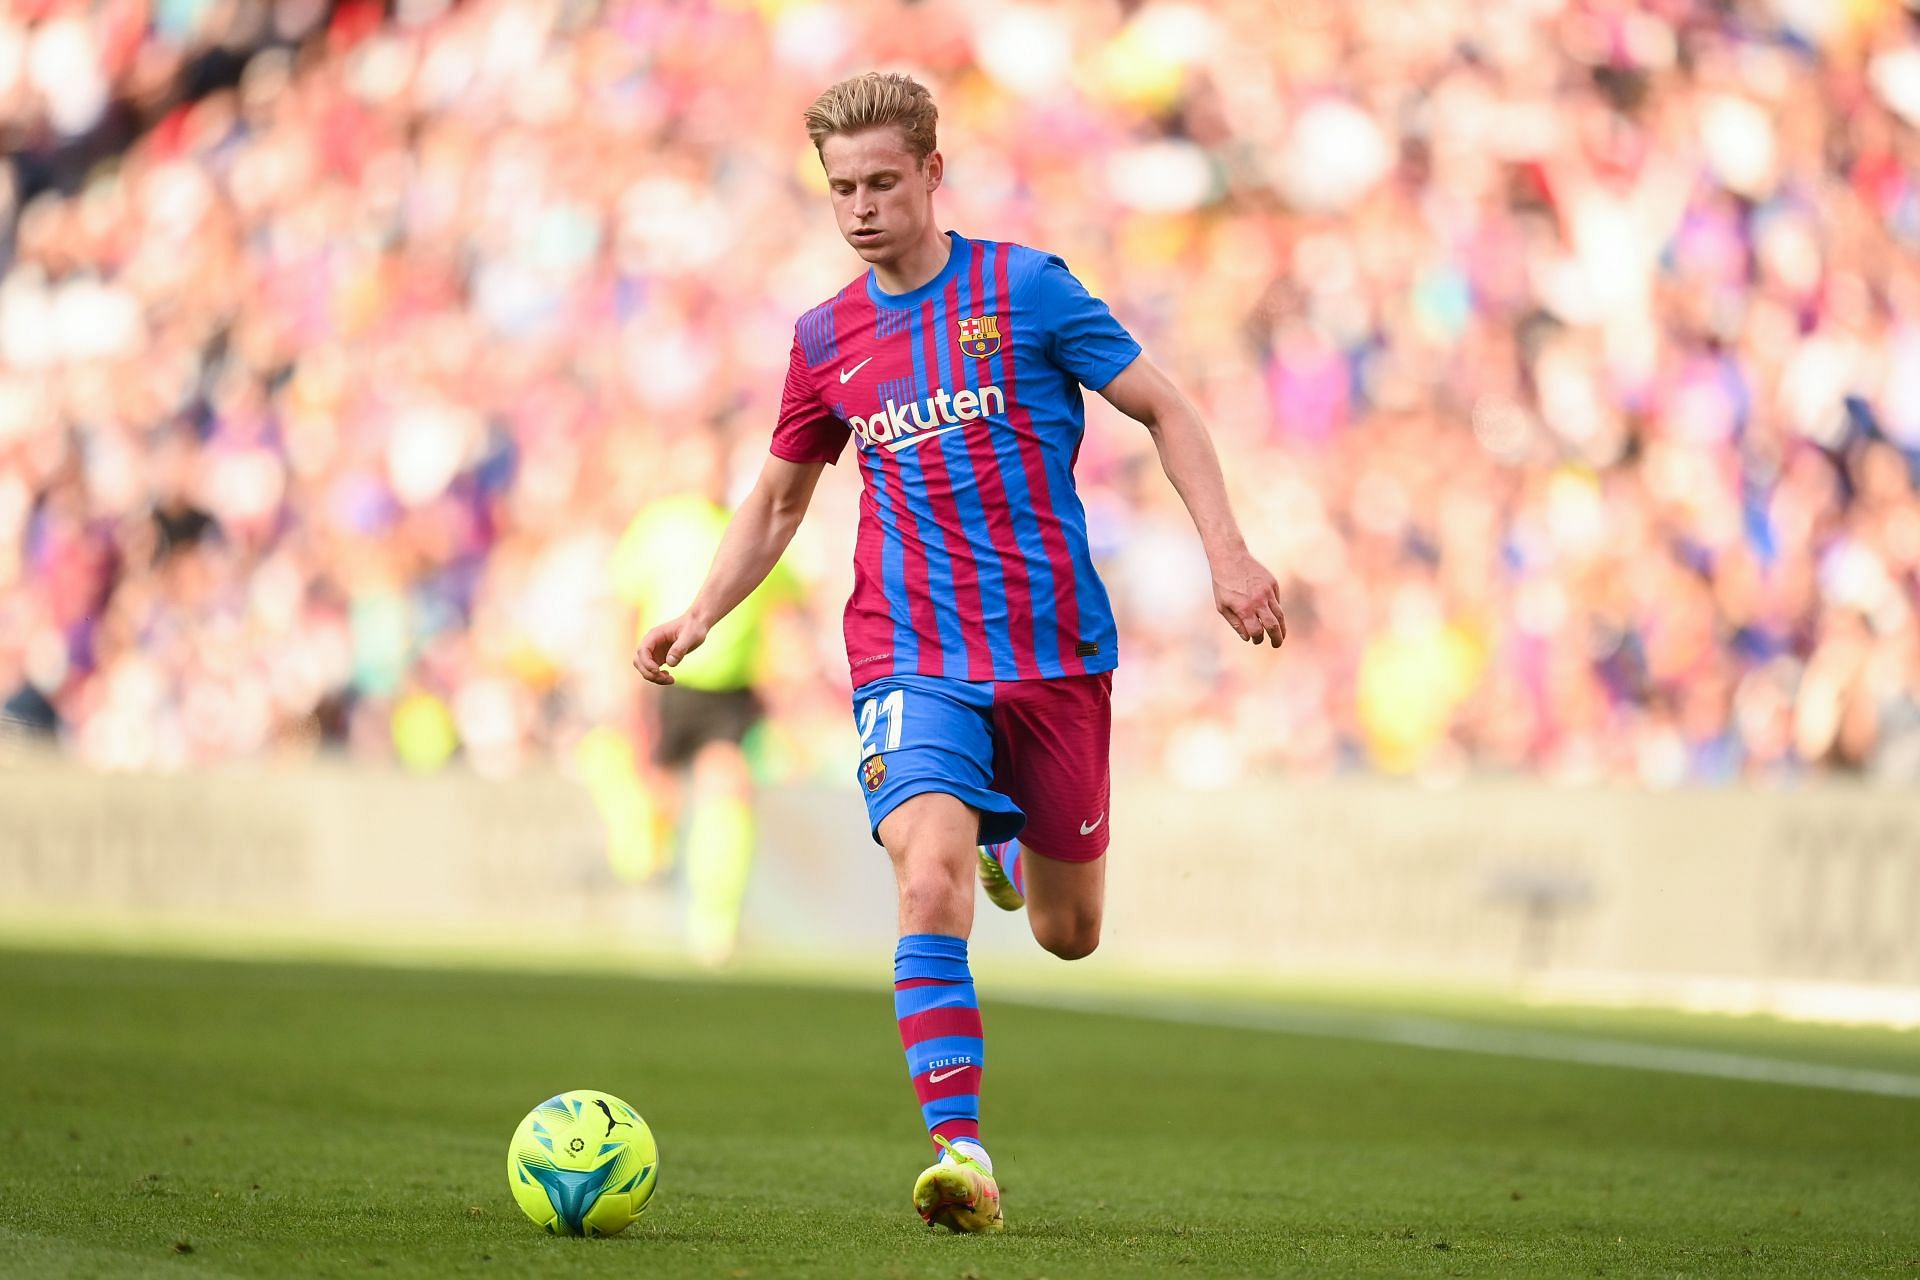 De Jong is a reported transfer target for Manchester United.